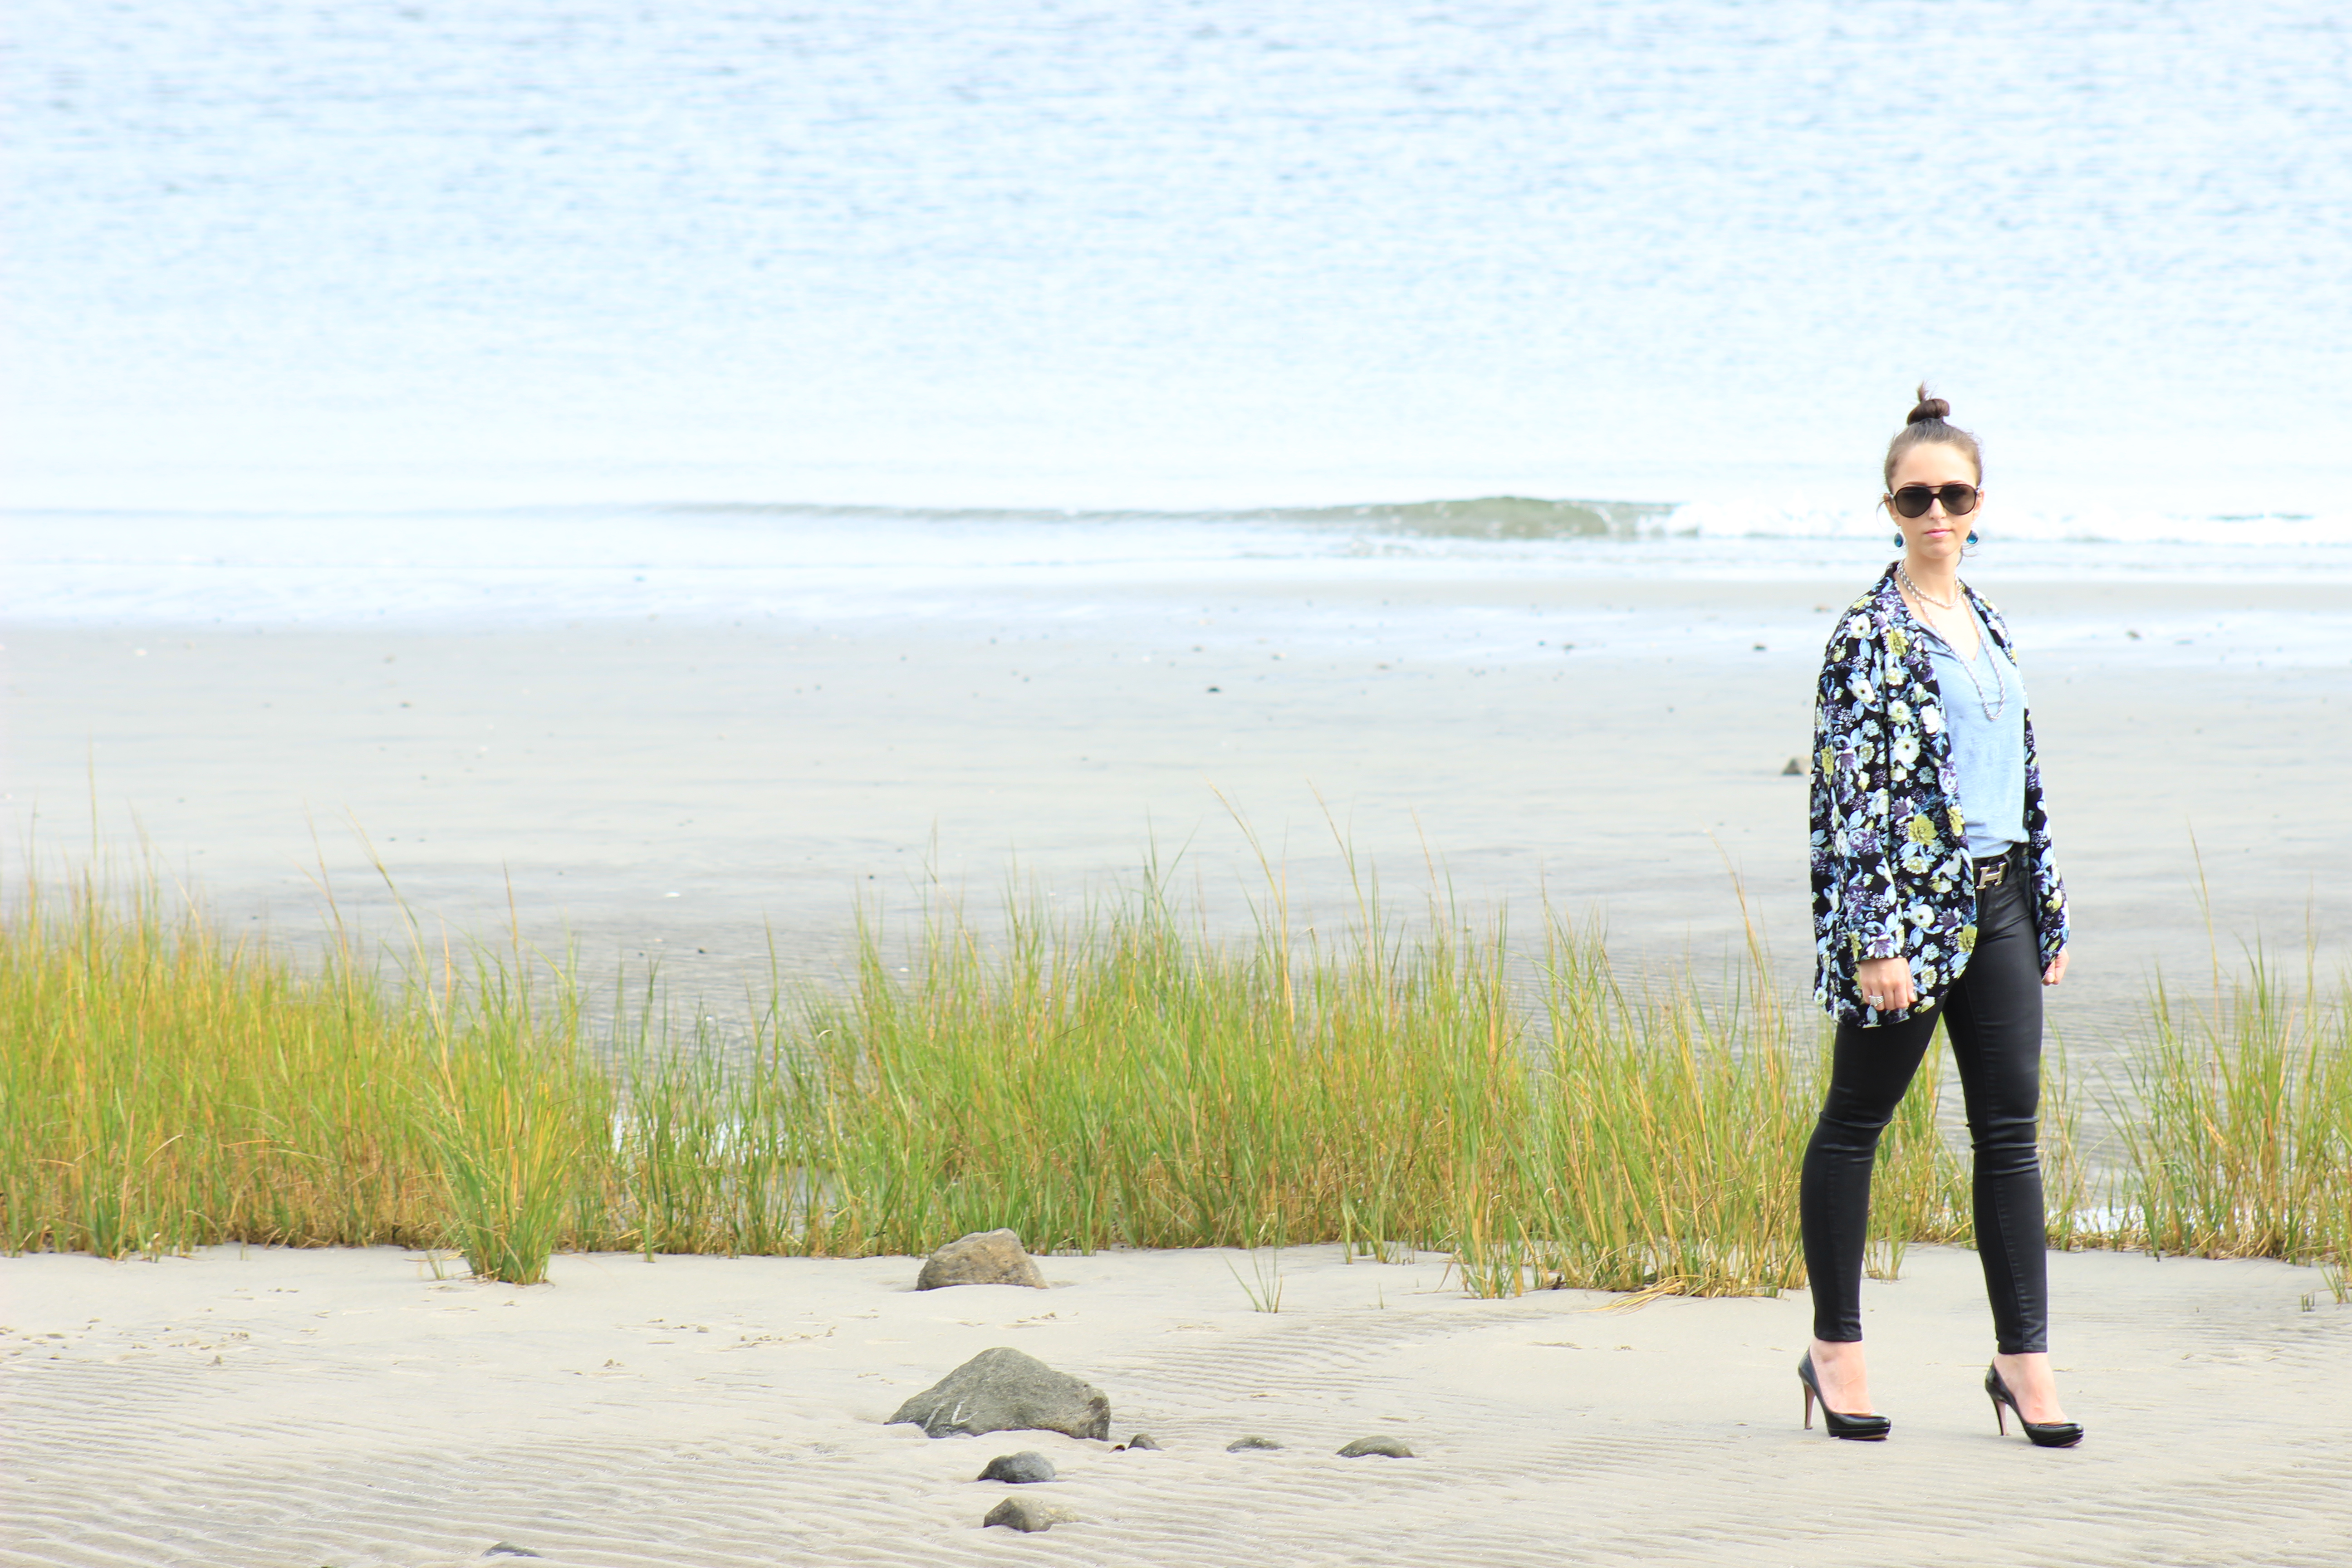 Fashion Friday: Floral, leather and the beach